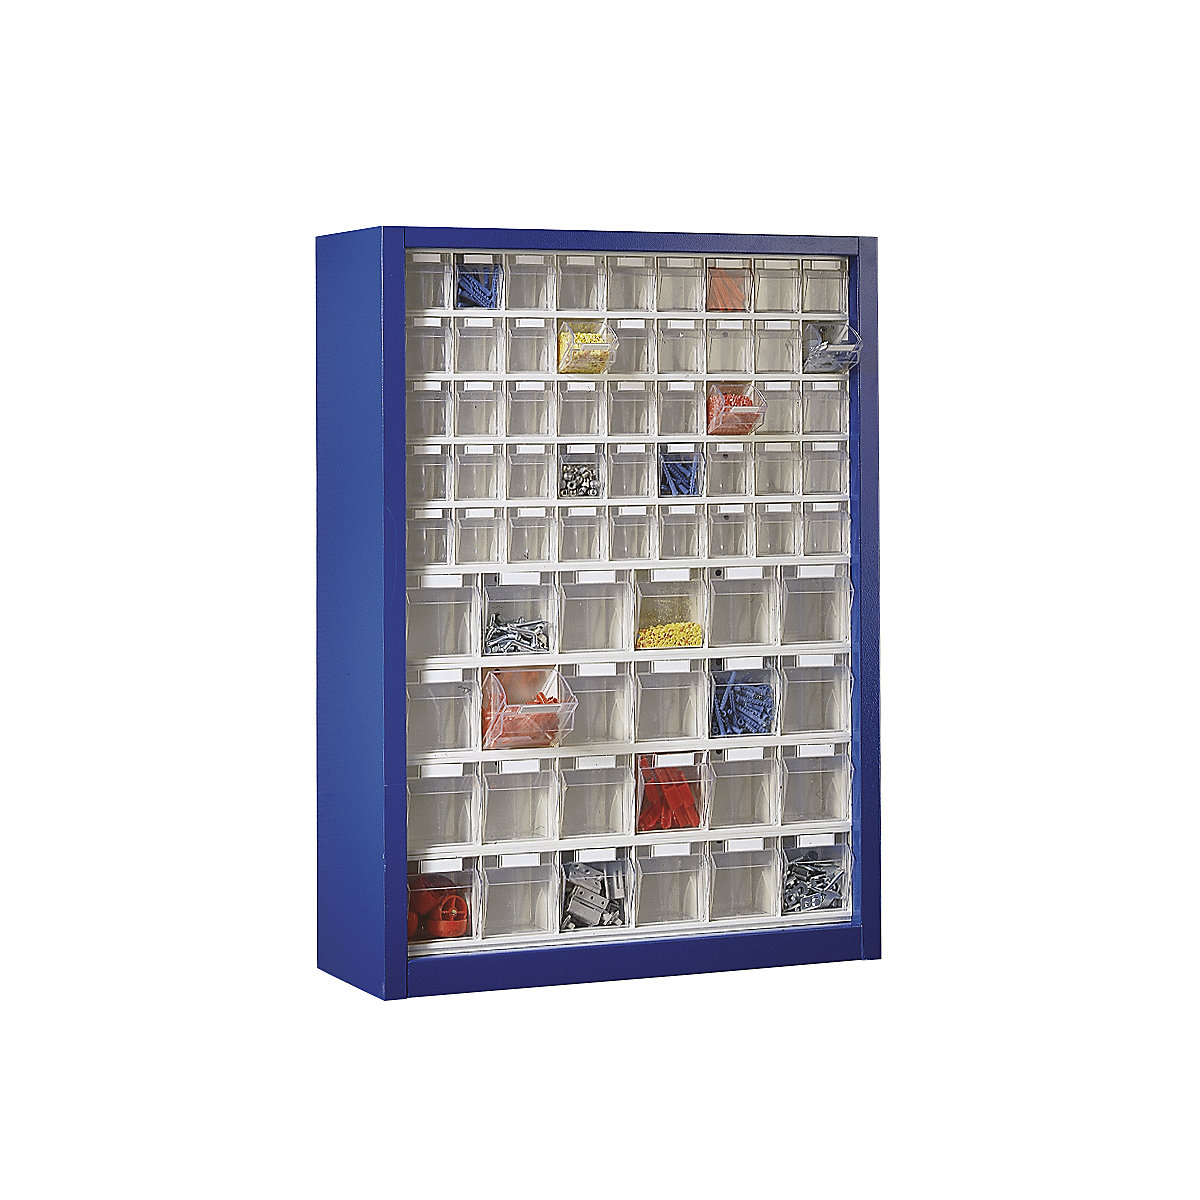 Wall mounted cupboard for visual storage containers, HxWxD 910 x 665 x 250 mm, with 69 bins, gentian blue housing-2